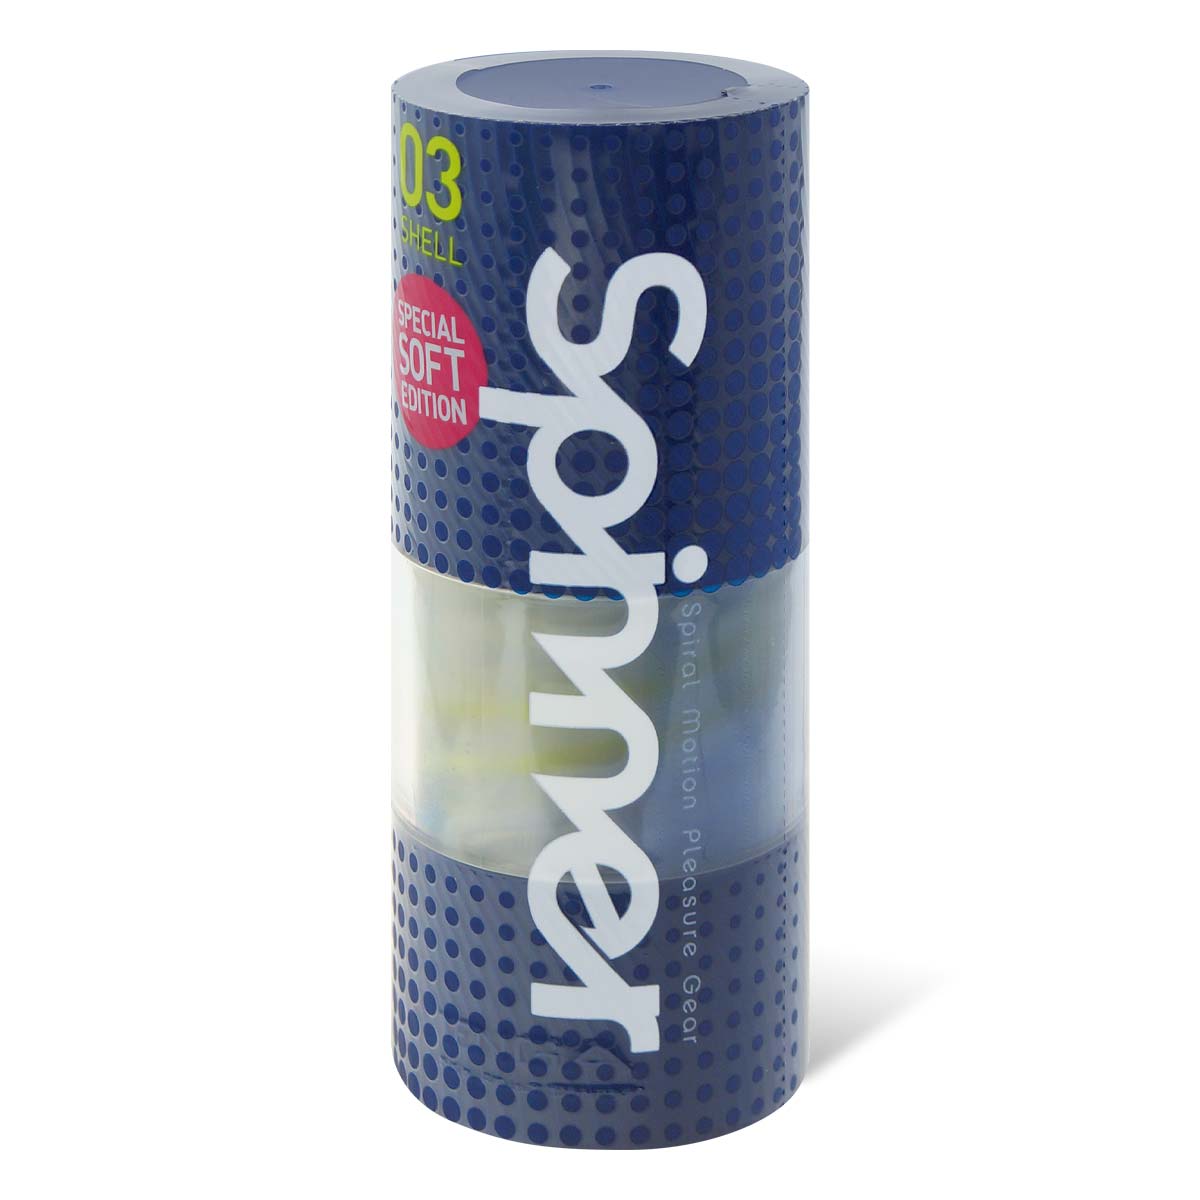 TENGA SPINNER SHELL SPECIAL SOFT EDITION-p_1